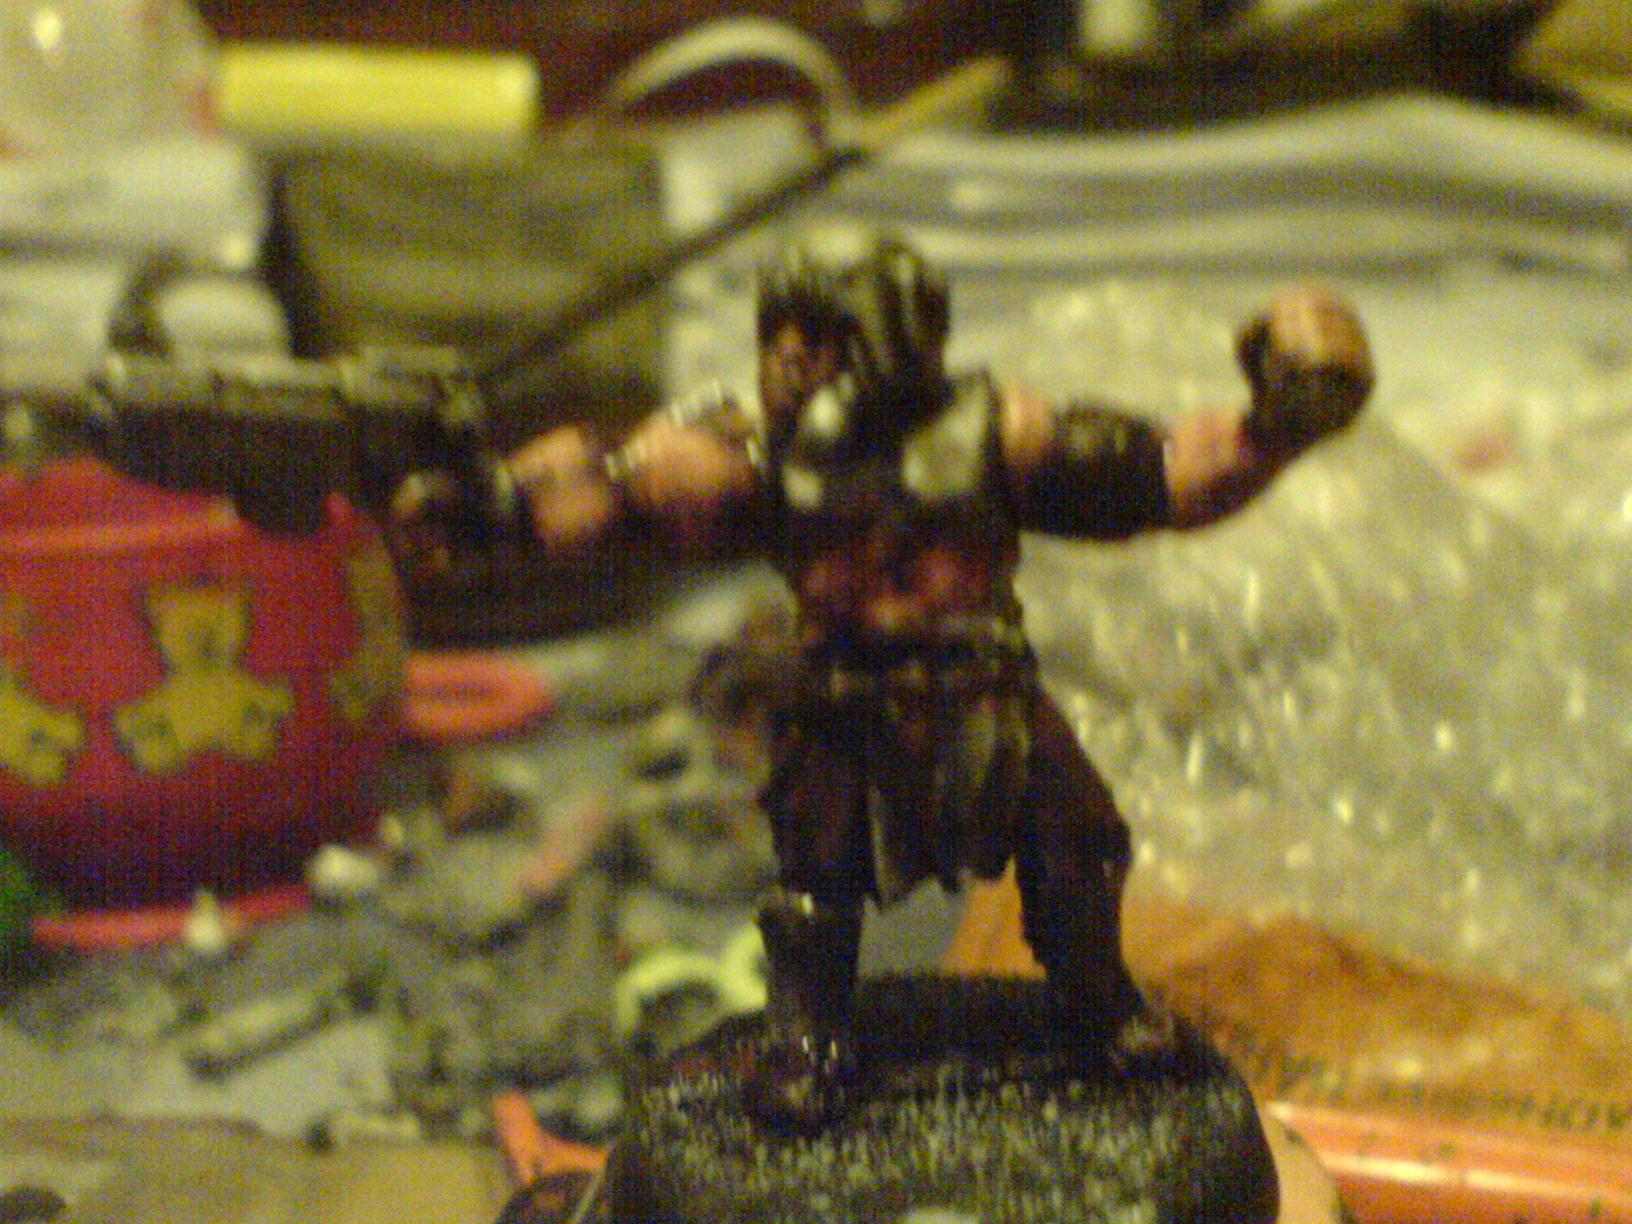 one of his retinue, still unfinished